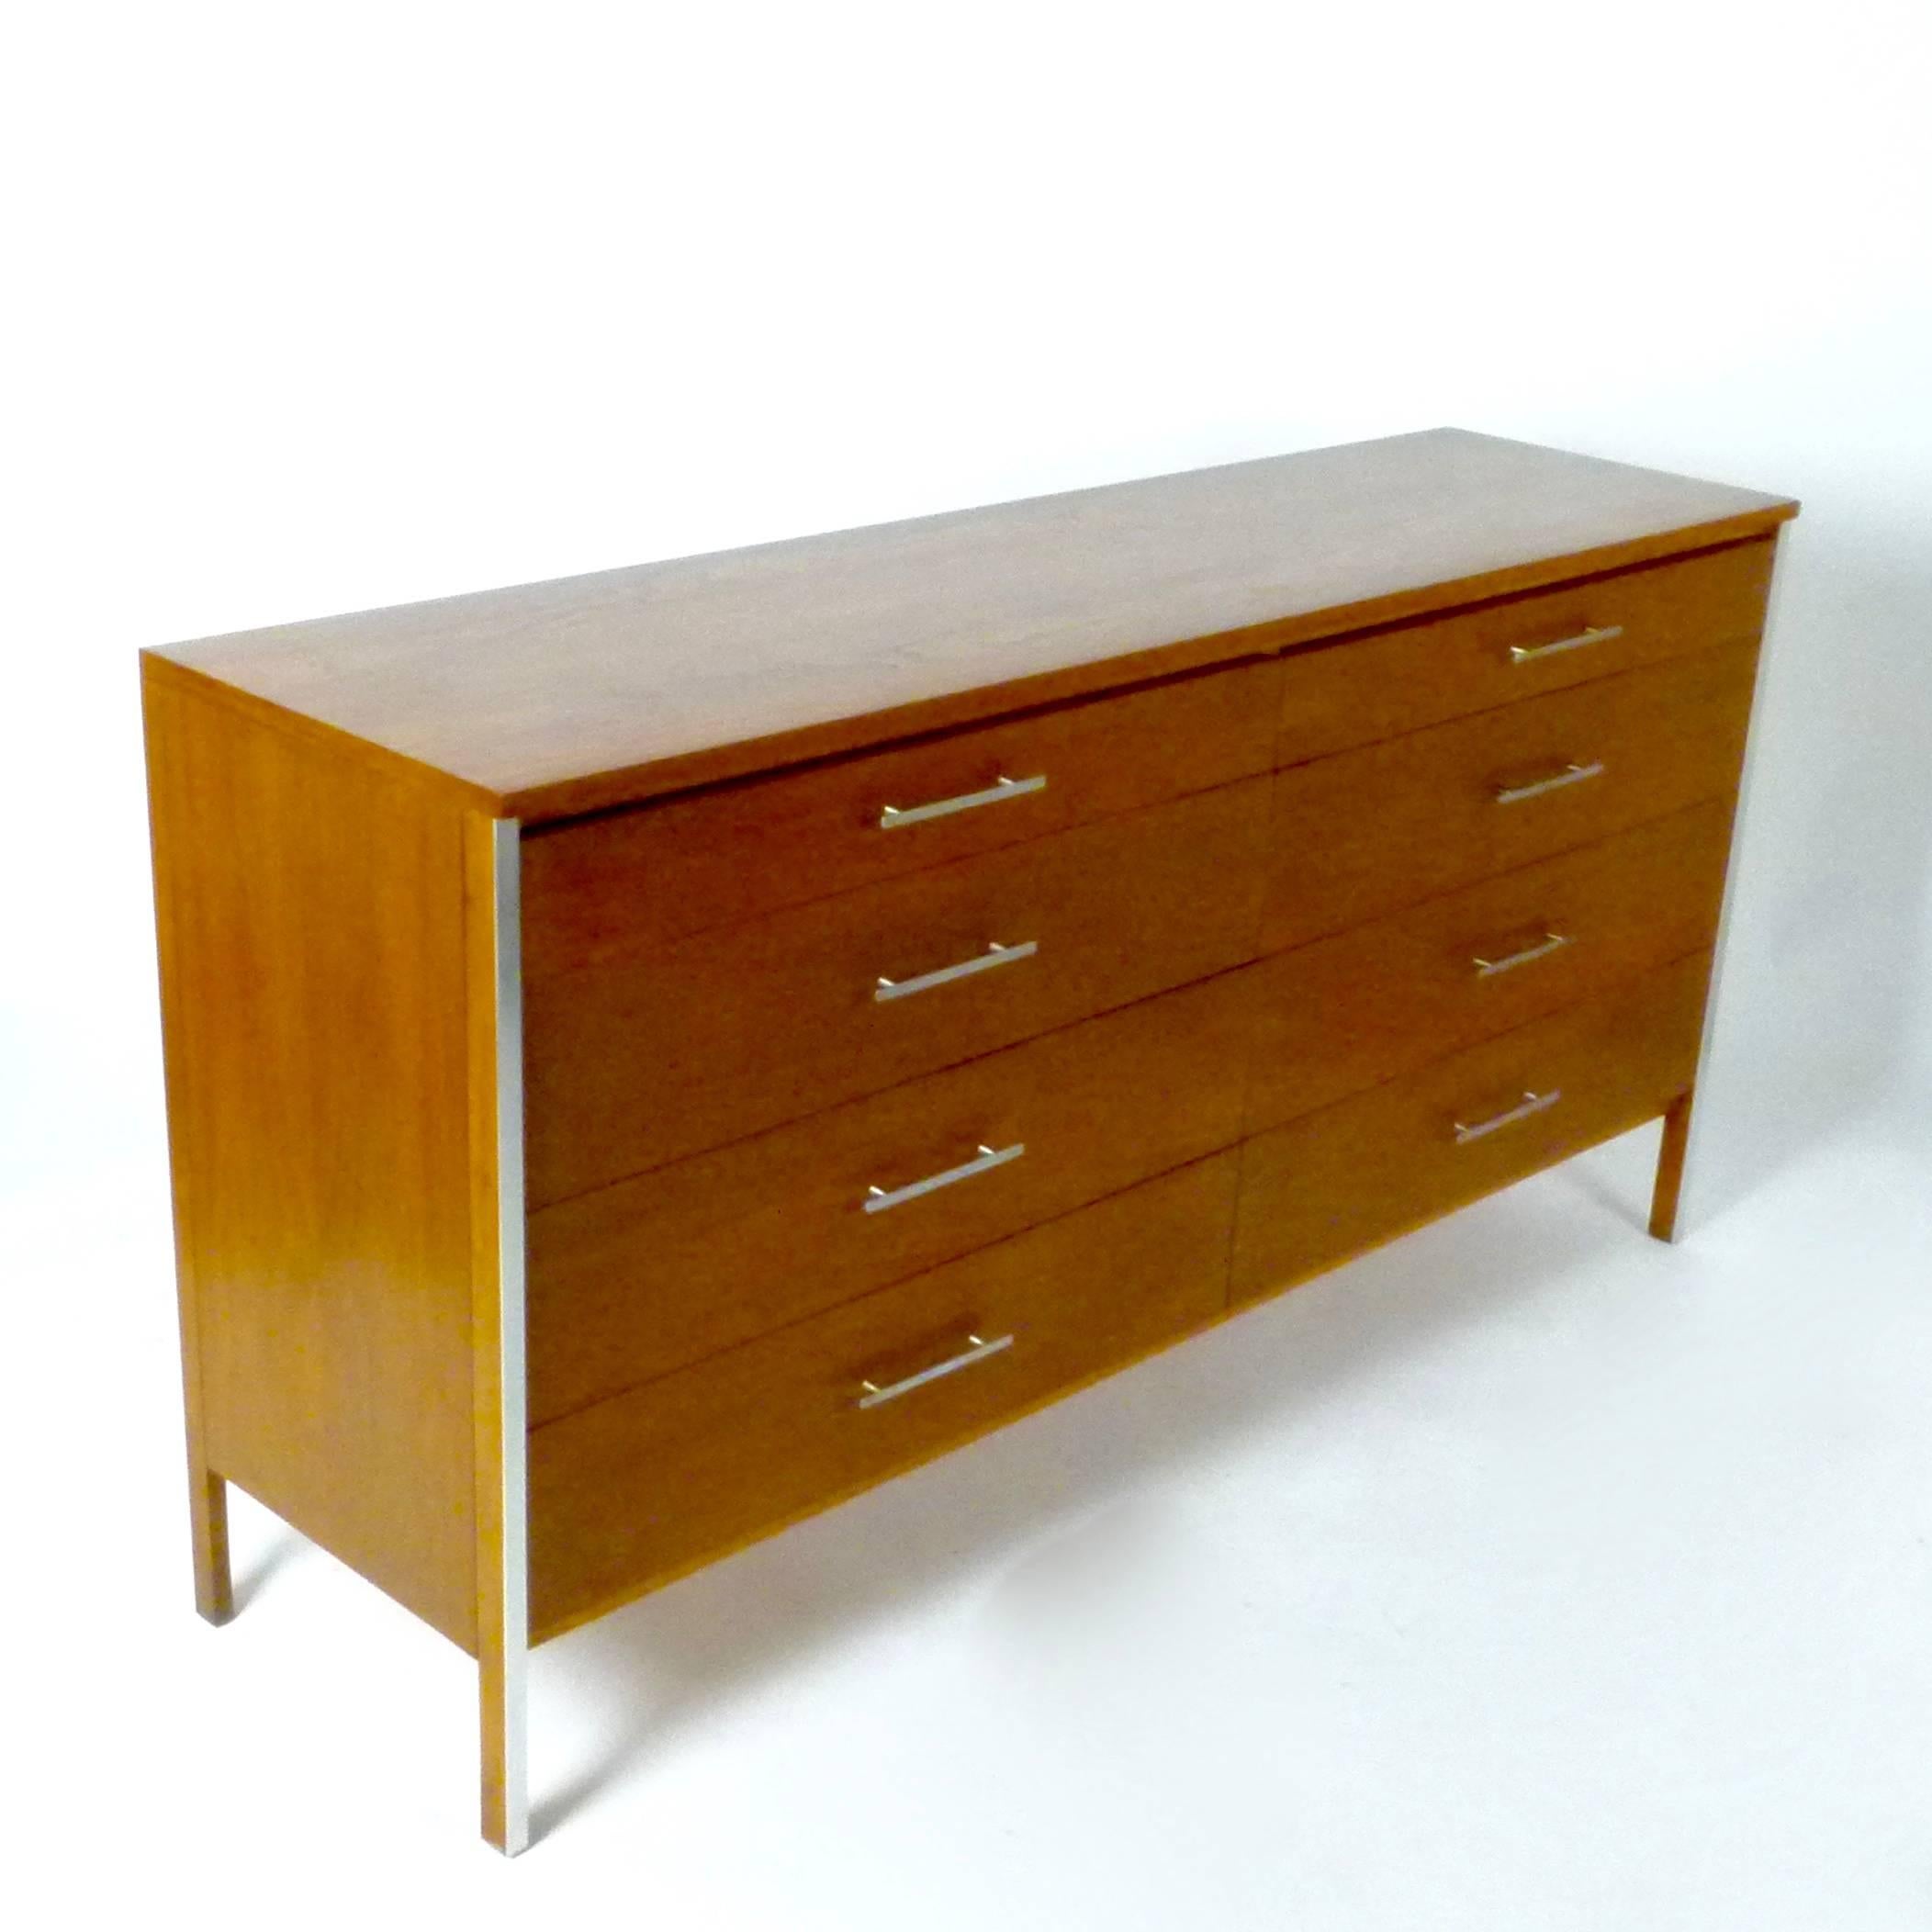 1960s eight-drawer dresser in walnut with aluminium detail and pulls by Paul McCobb from his Calvin line. Restored top.